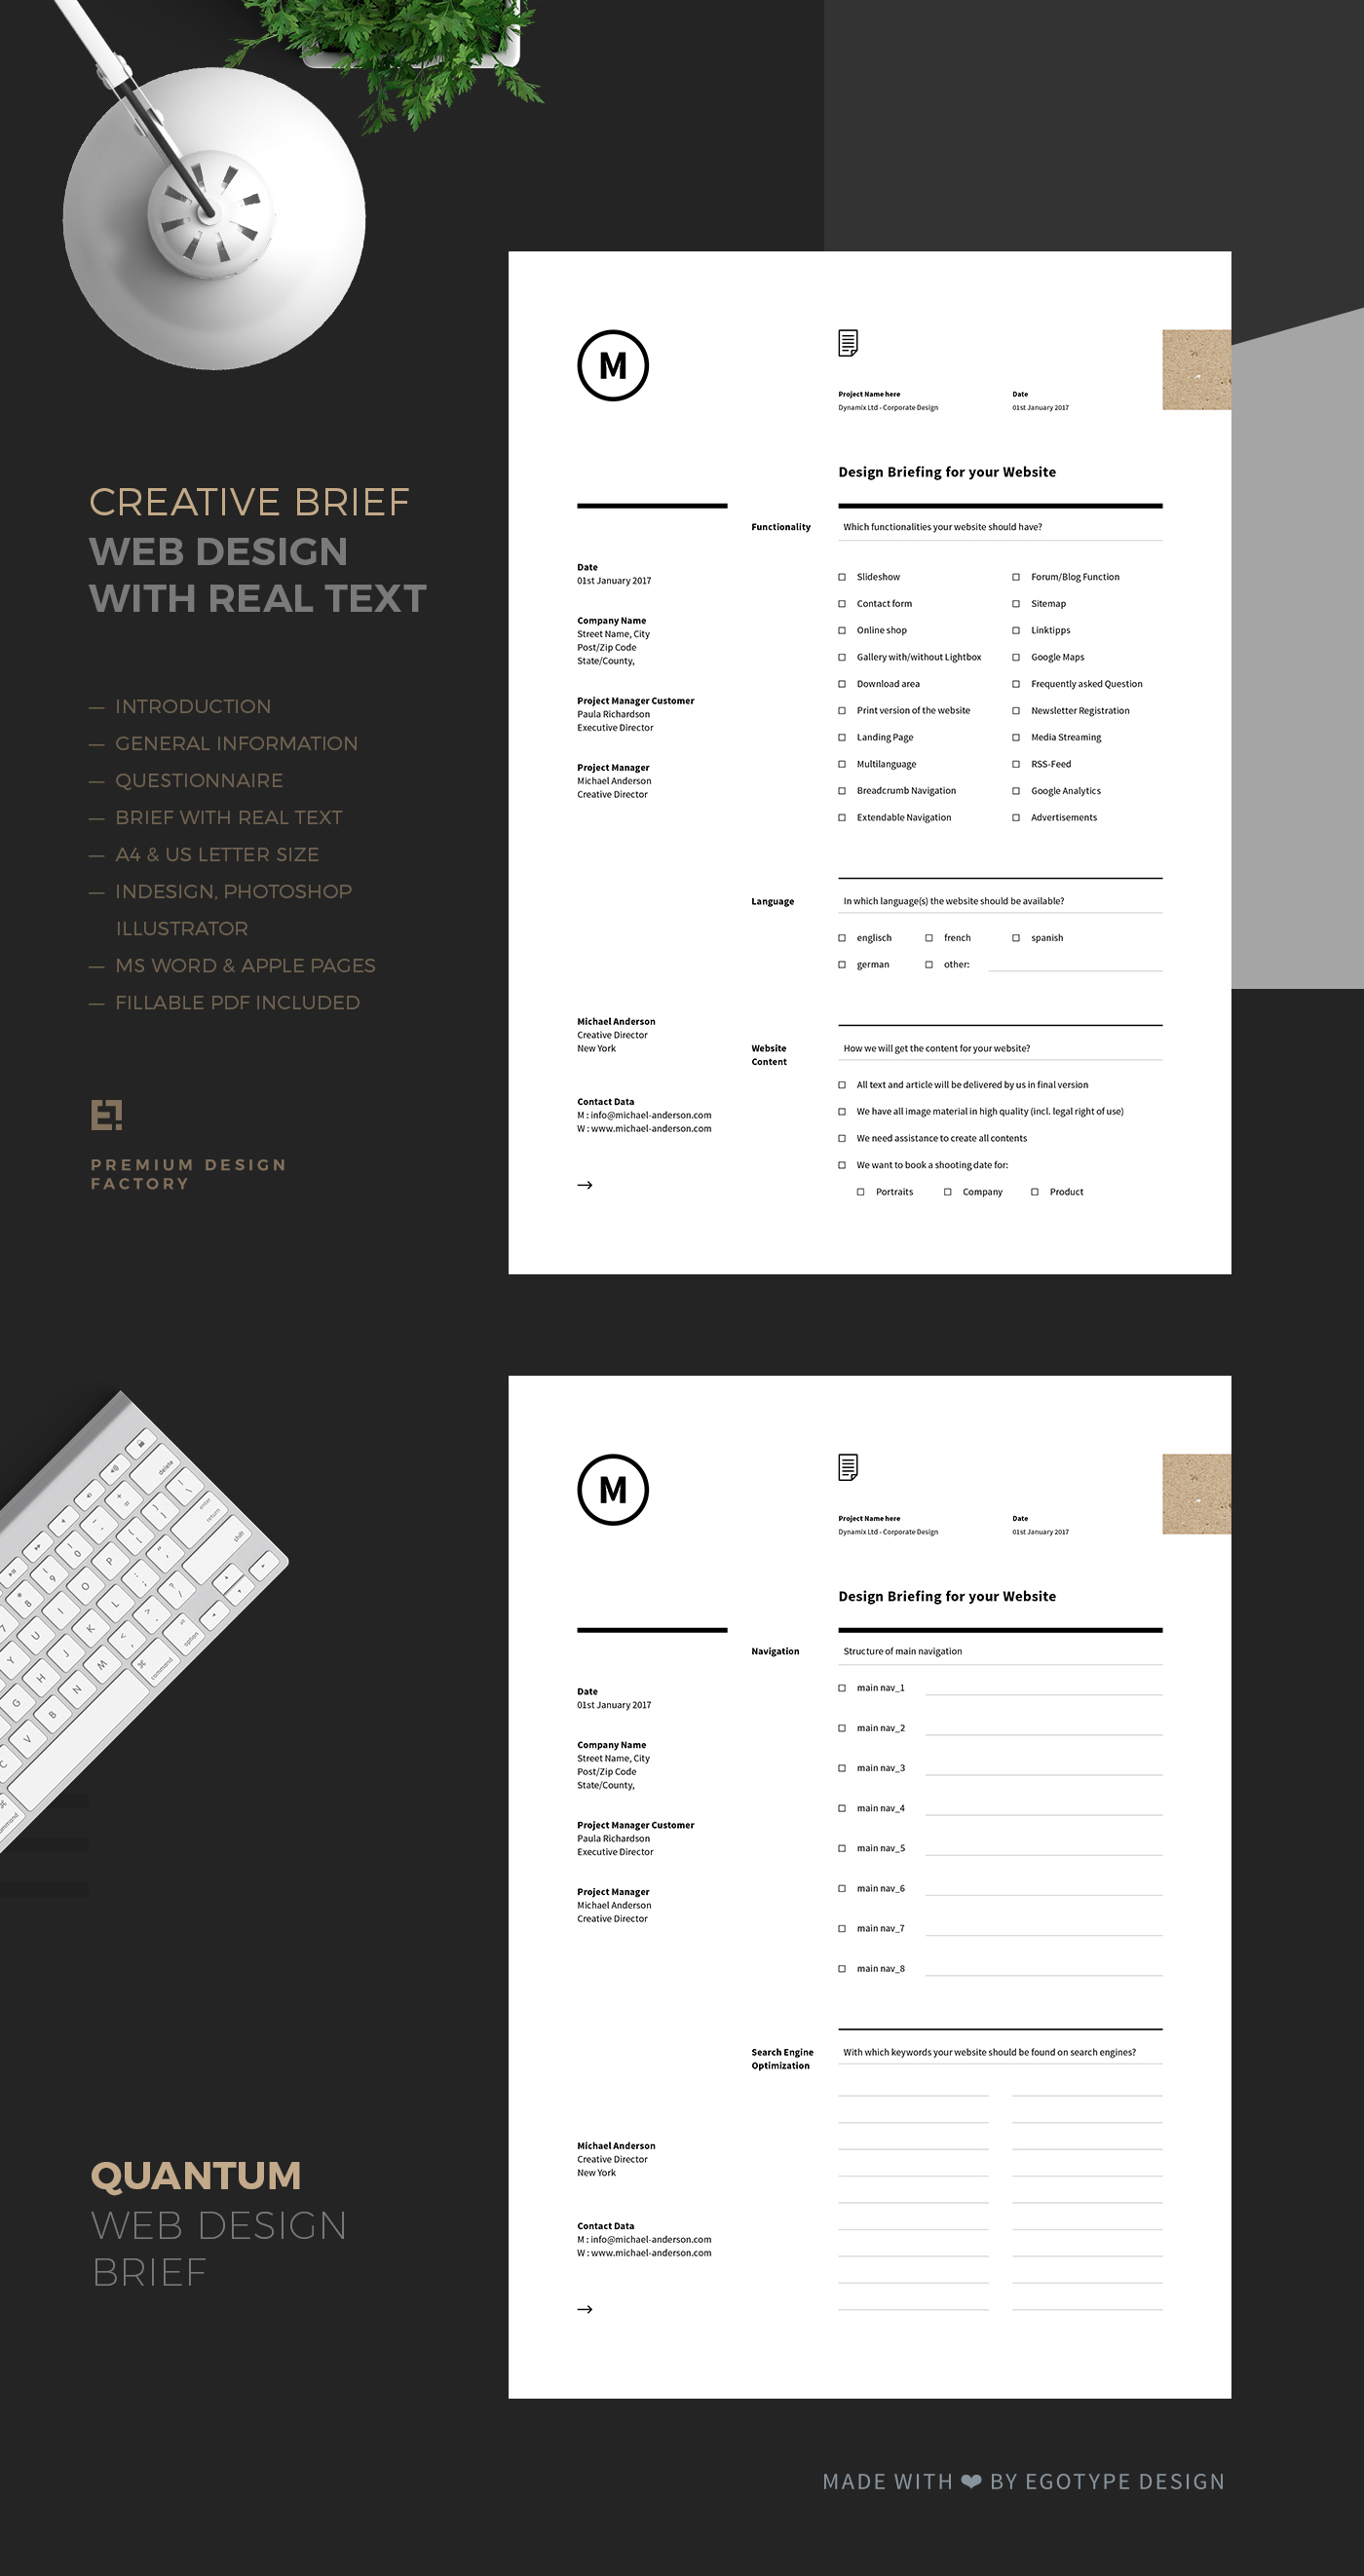 Web Design  brief guidelines Project Proposal template agency management offer questionnnaire